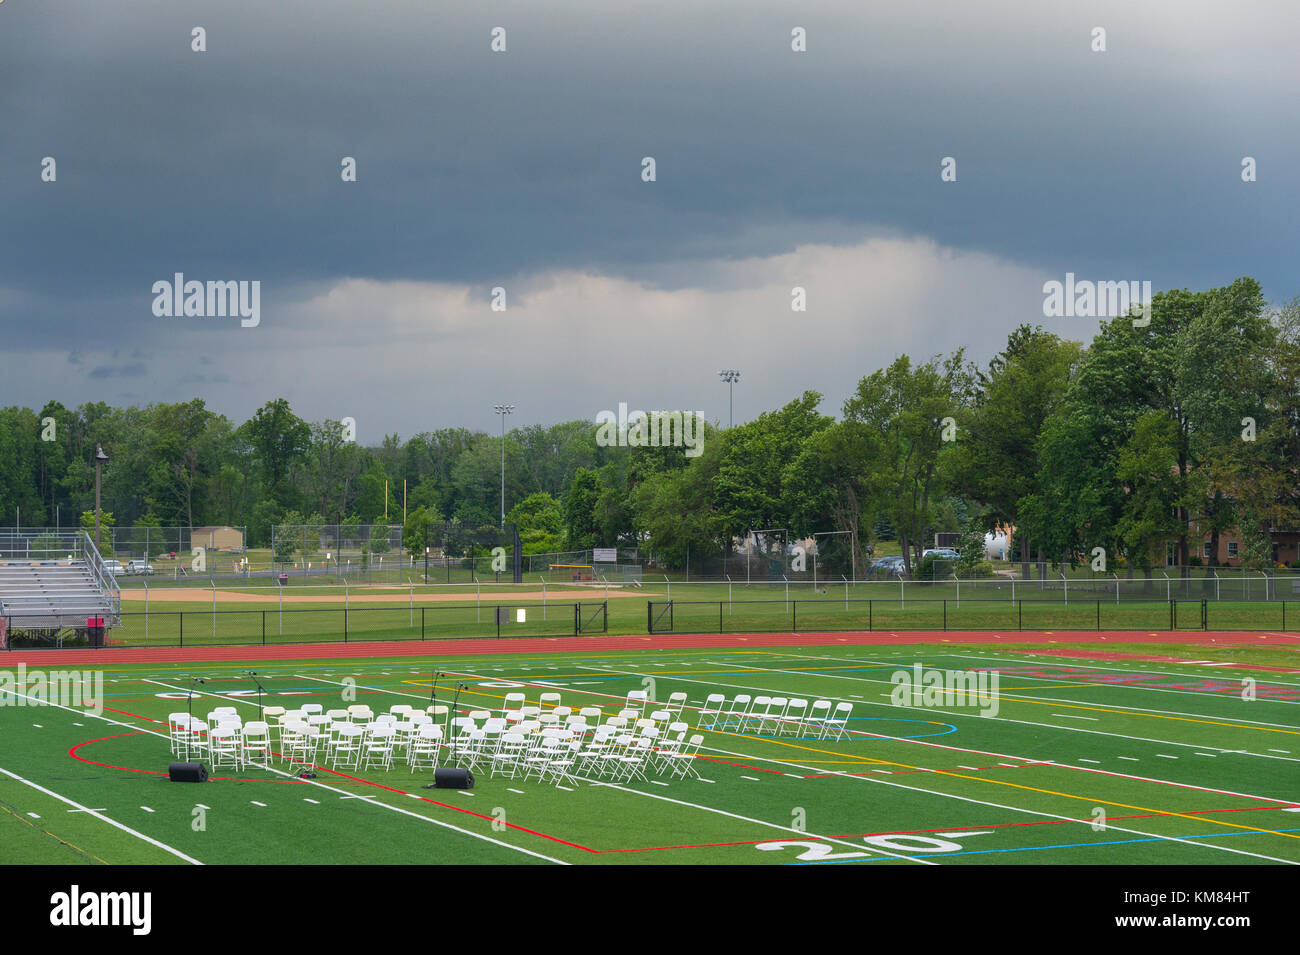 Empty Band Chairs On Football Field With Approaching Storm Stock Photo